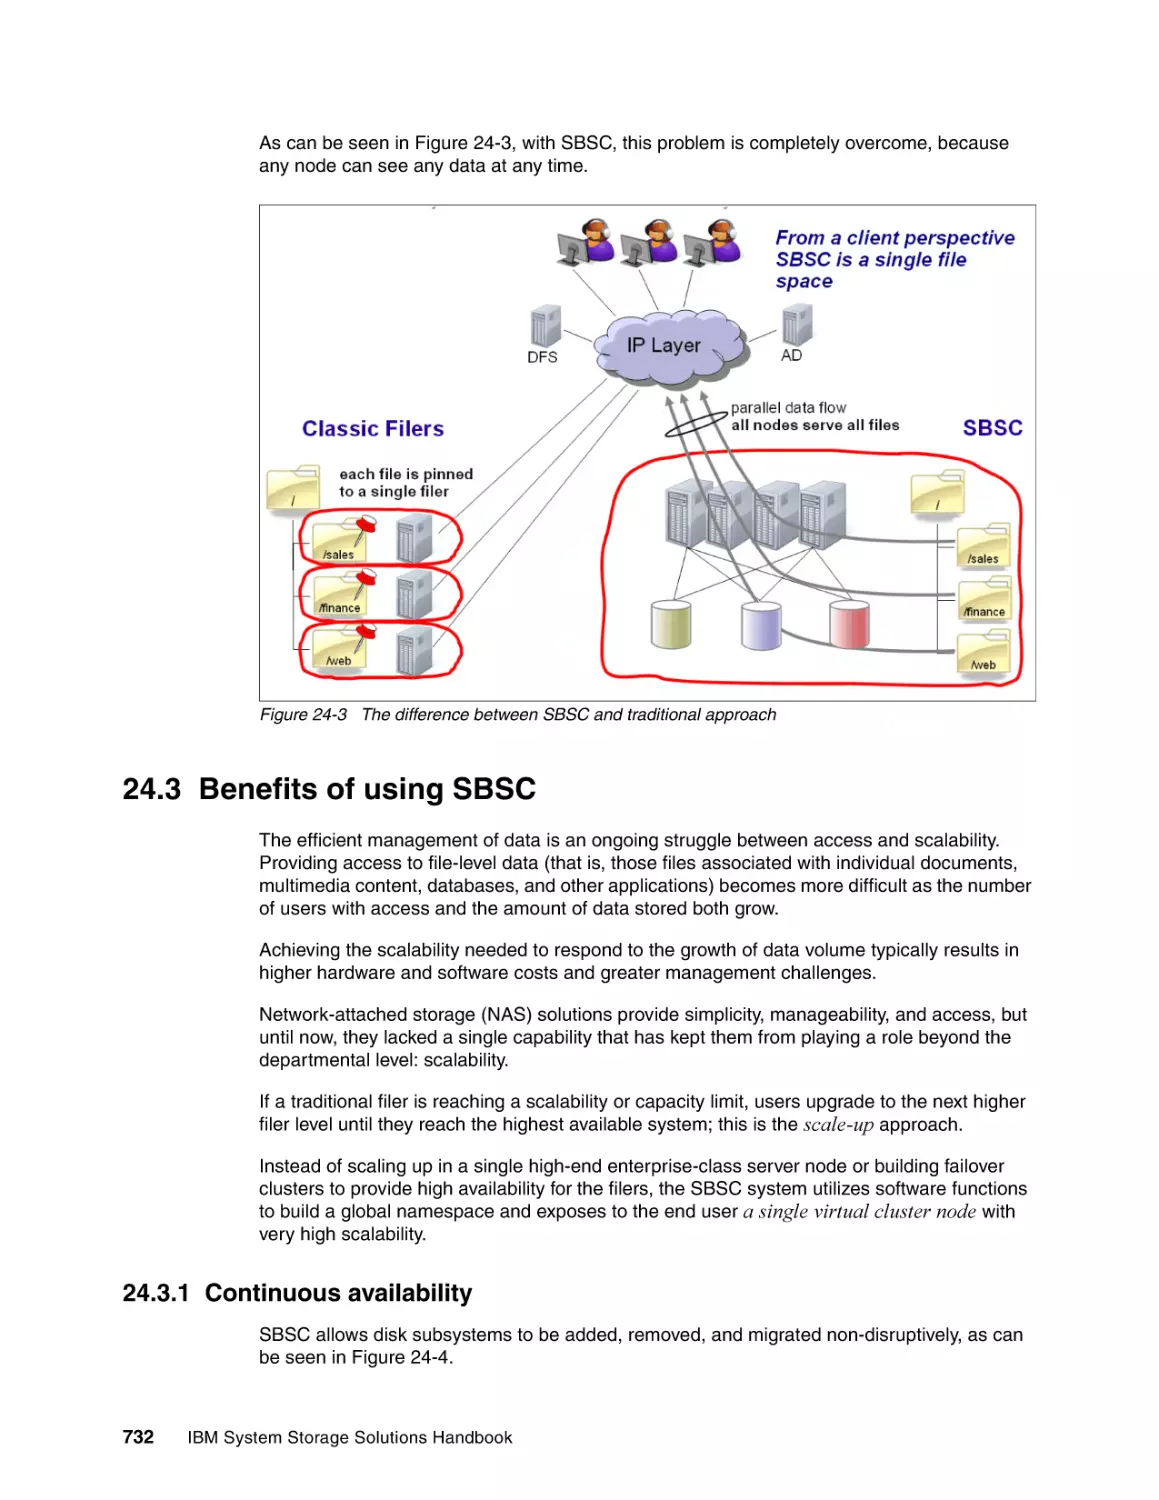 24.3 Benefits of using SBSC
24.3.1 Continuous availability